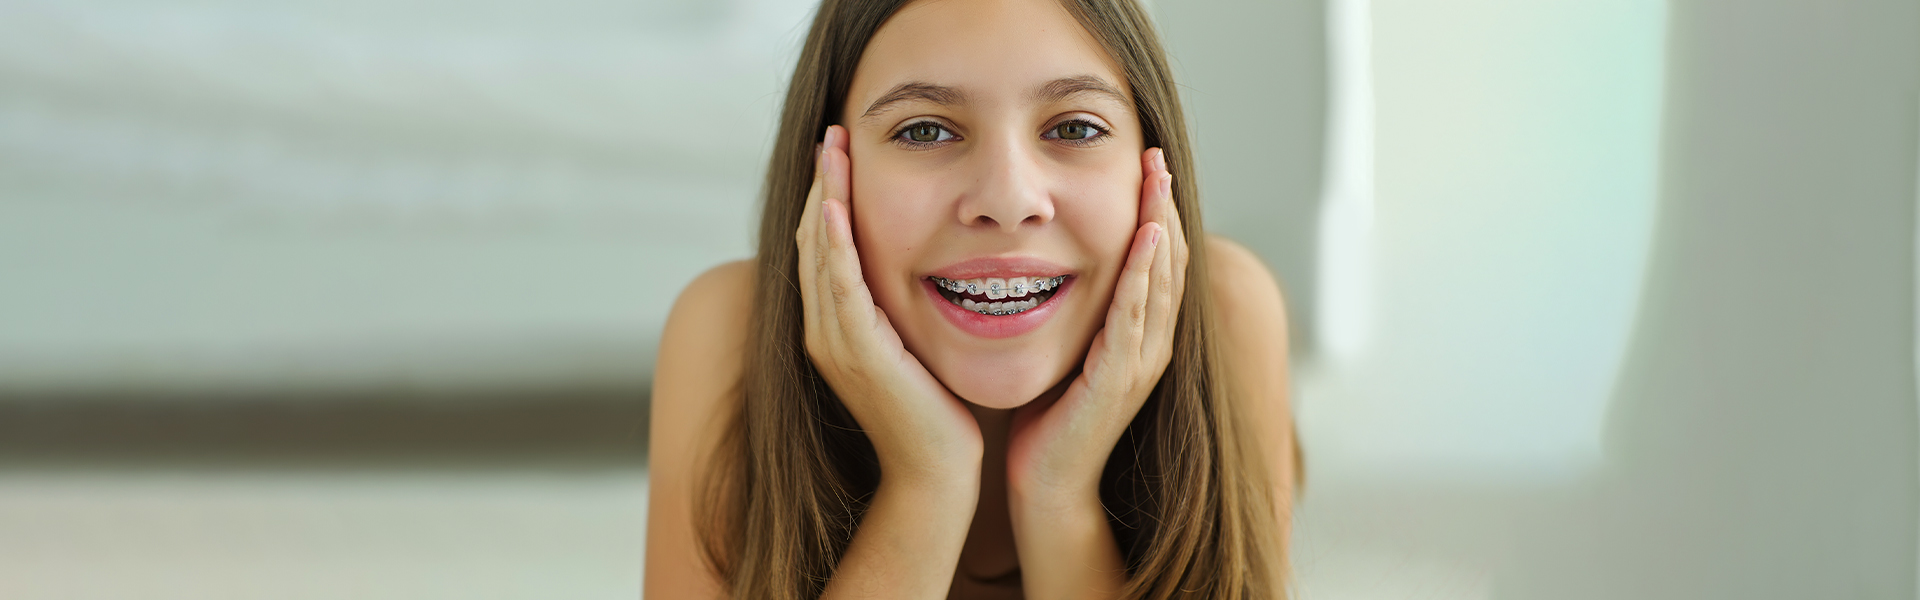 Braces Are More Than Cosmetic – Why Straight Teeth Matter